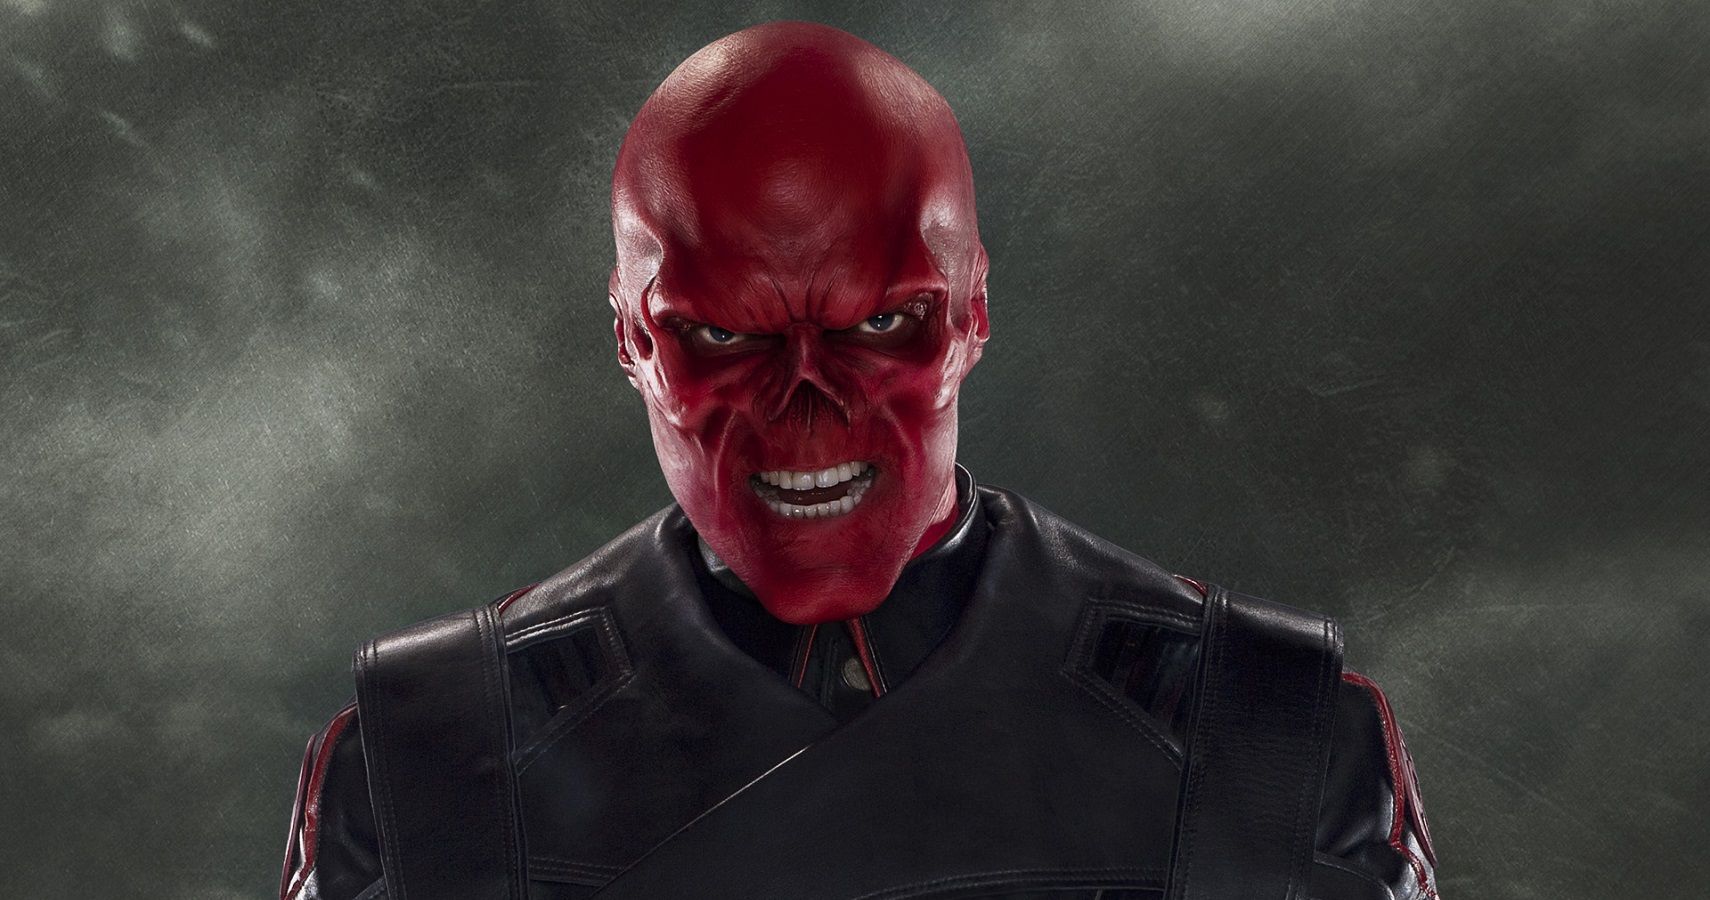 10 Facts About The Red Skull The MCU Never Explored